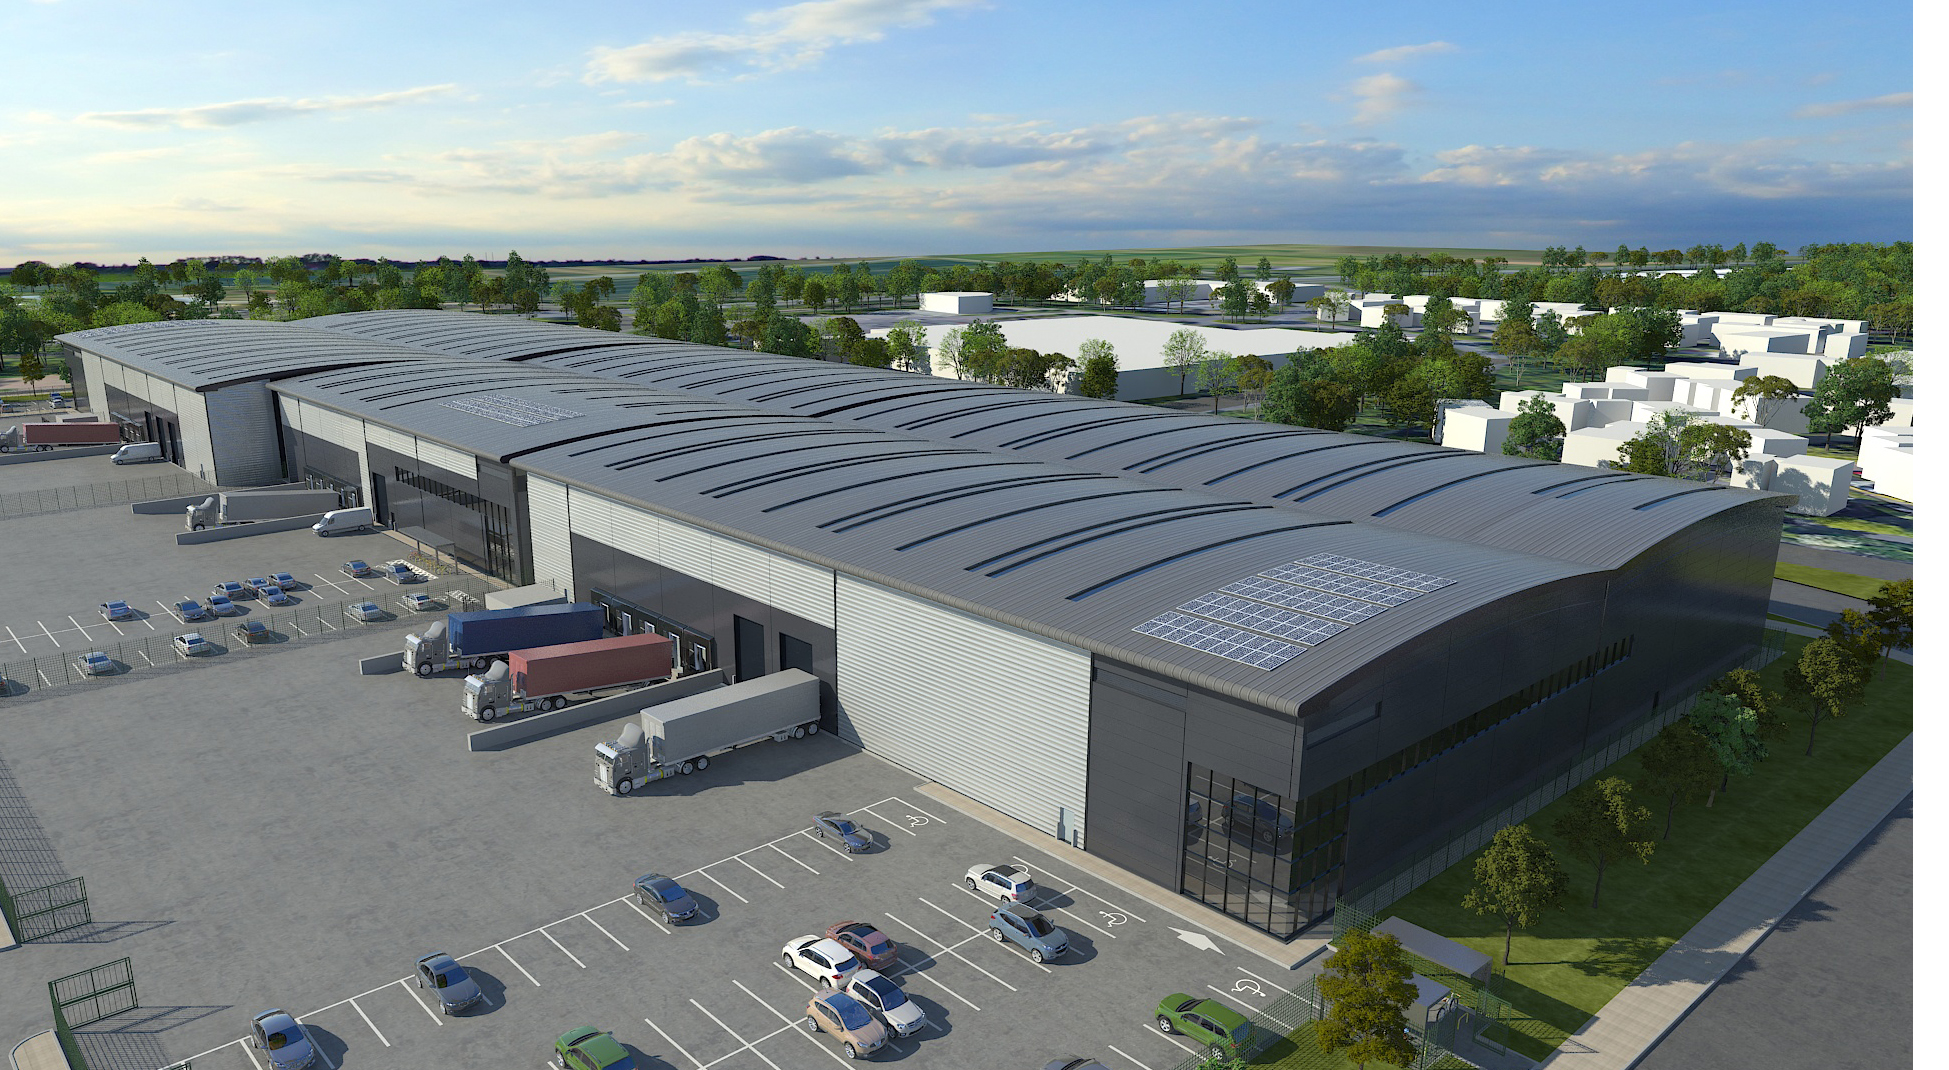 Harleyford Capital Announces Urban Logistics Development Site Acquisition funded by Fiera Real Estate